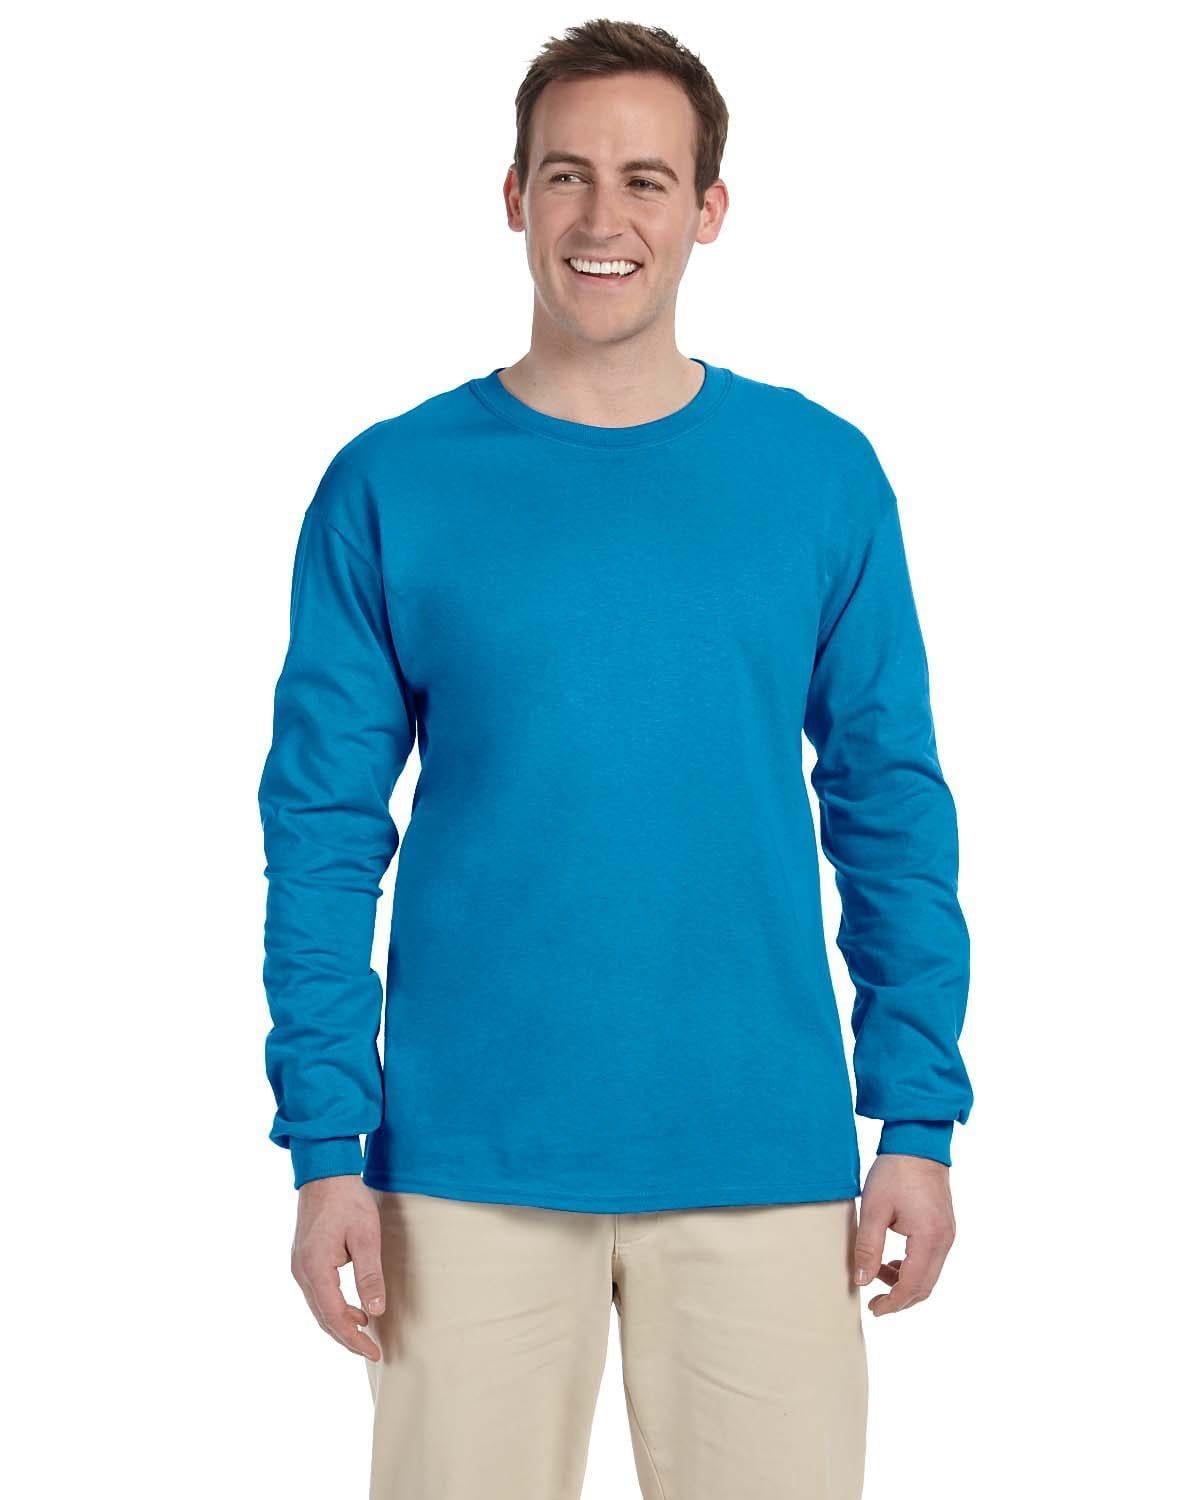 Fruit of The Loom 4930 HD Cotton Long Sleeve T-Shirt - Pacific Blue, L